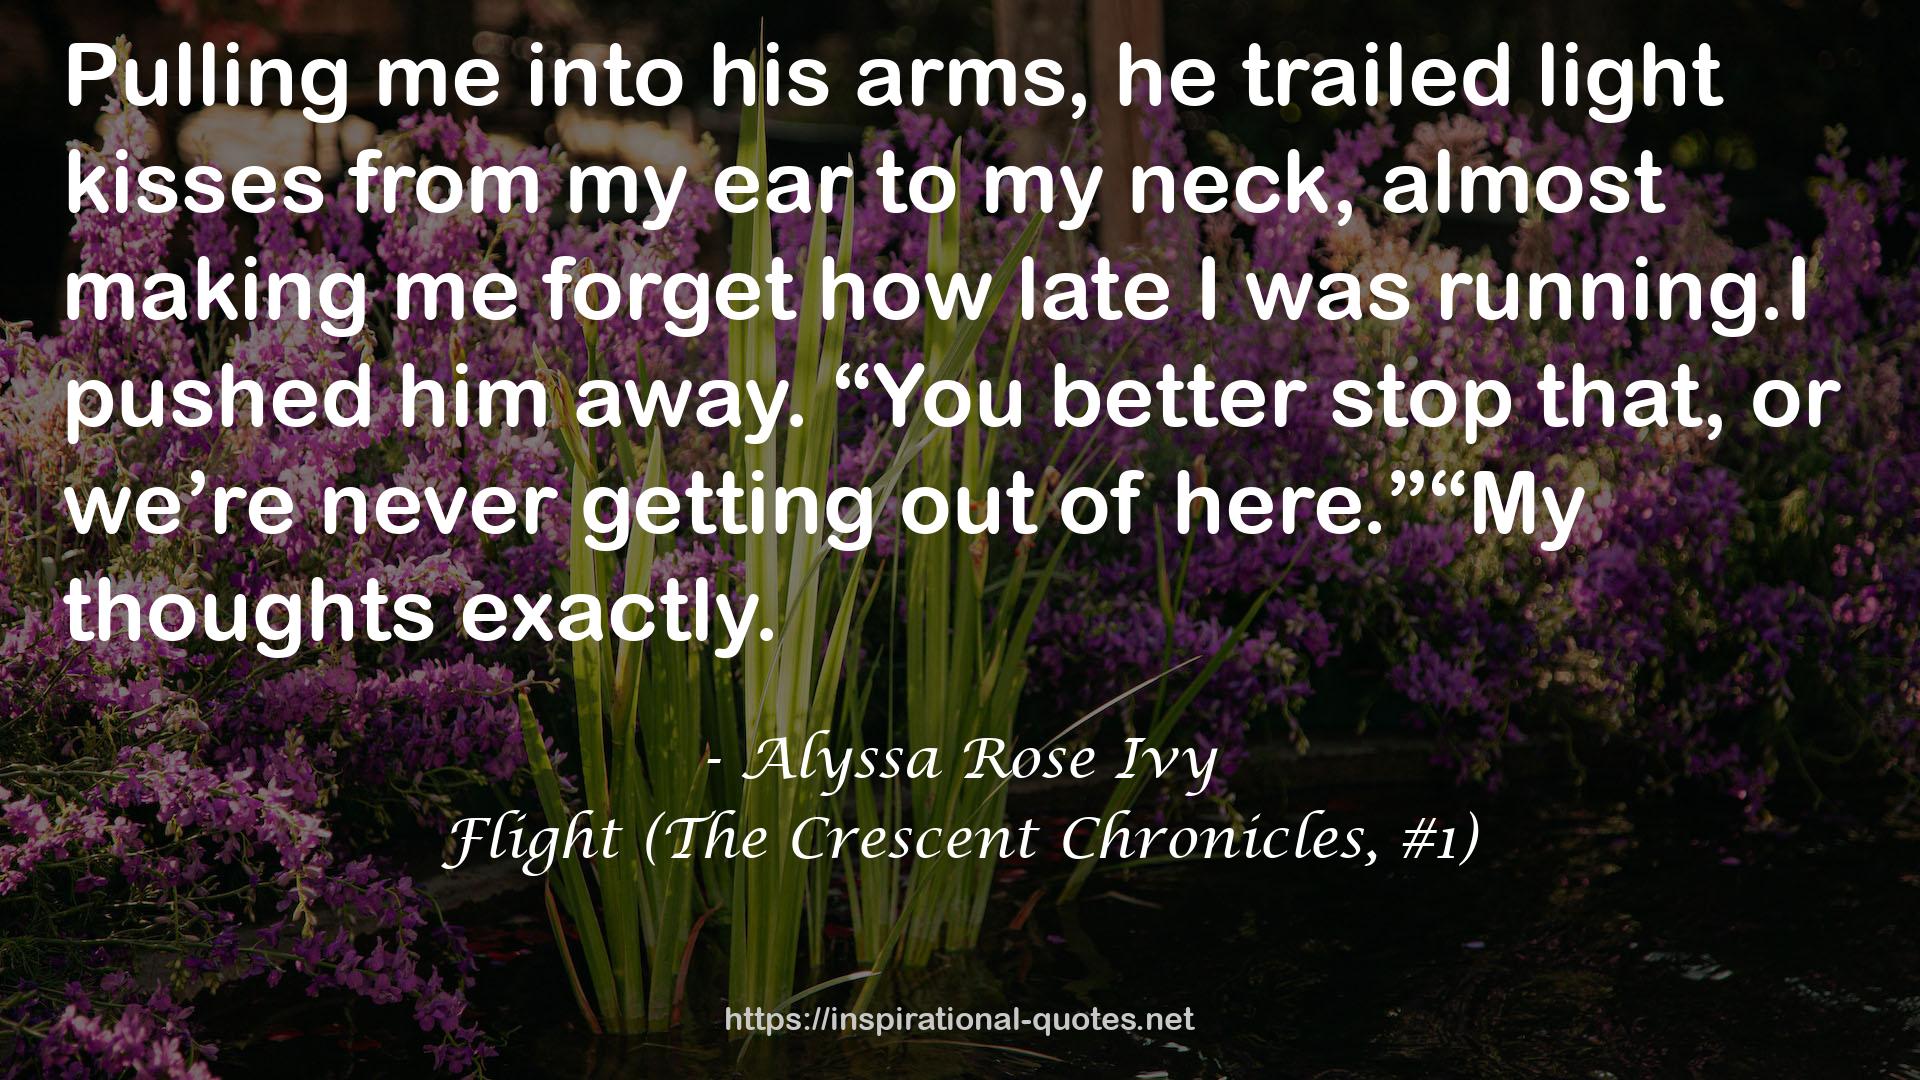 Flight (The Crescent Chronicles, #1) QUOTES